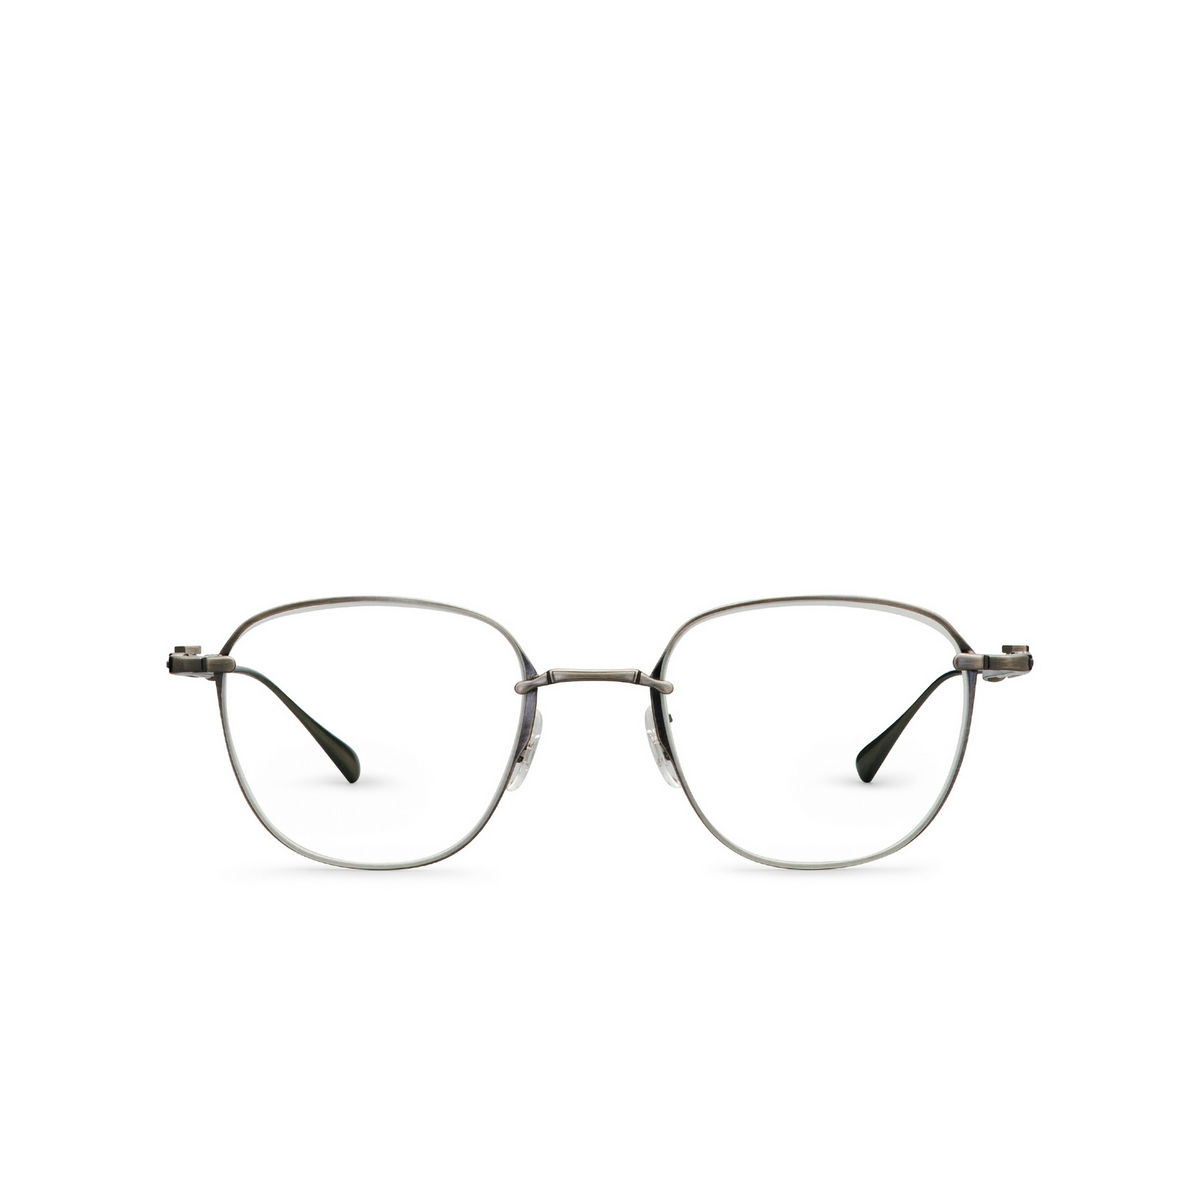 Mr. Leight GRIFFITH CL Eyeglasses PW-GRYSTN Pewter-Greystone - 1/3